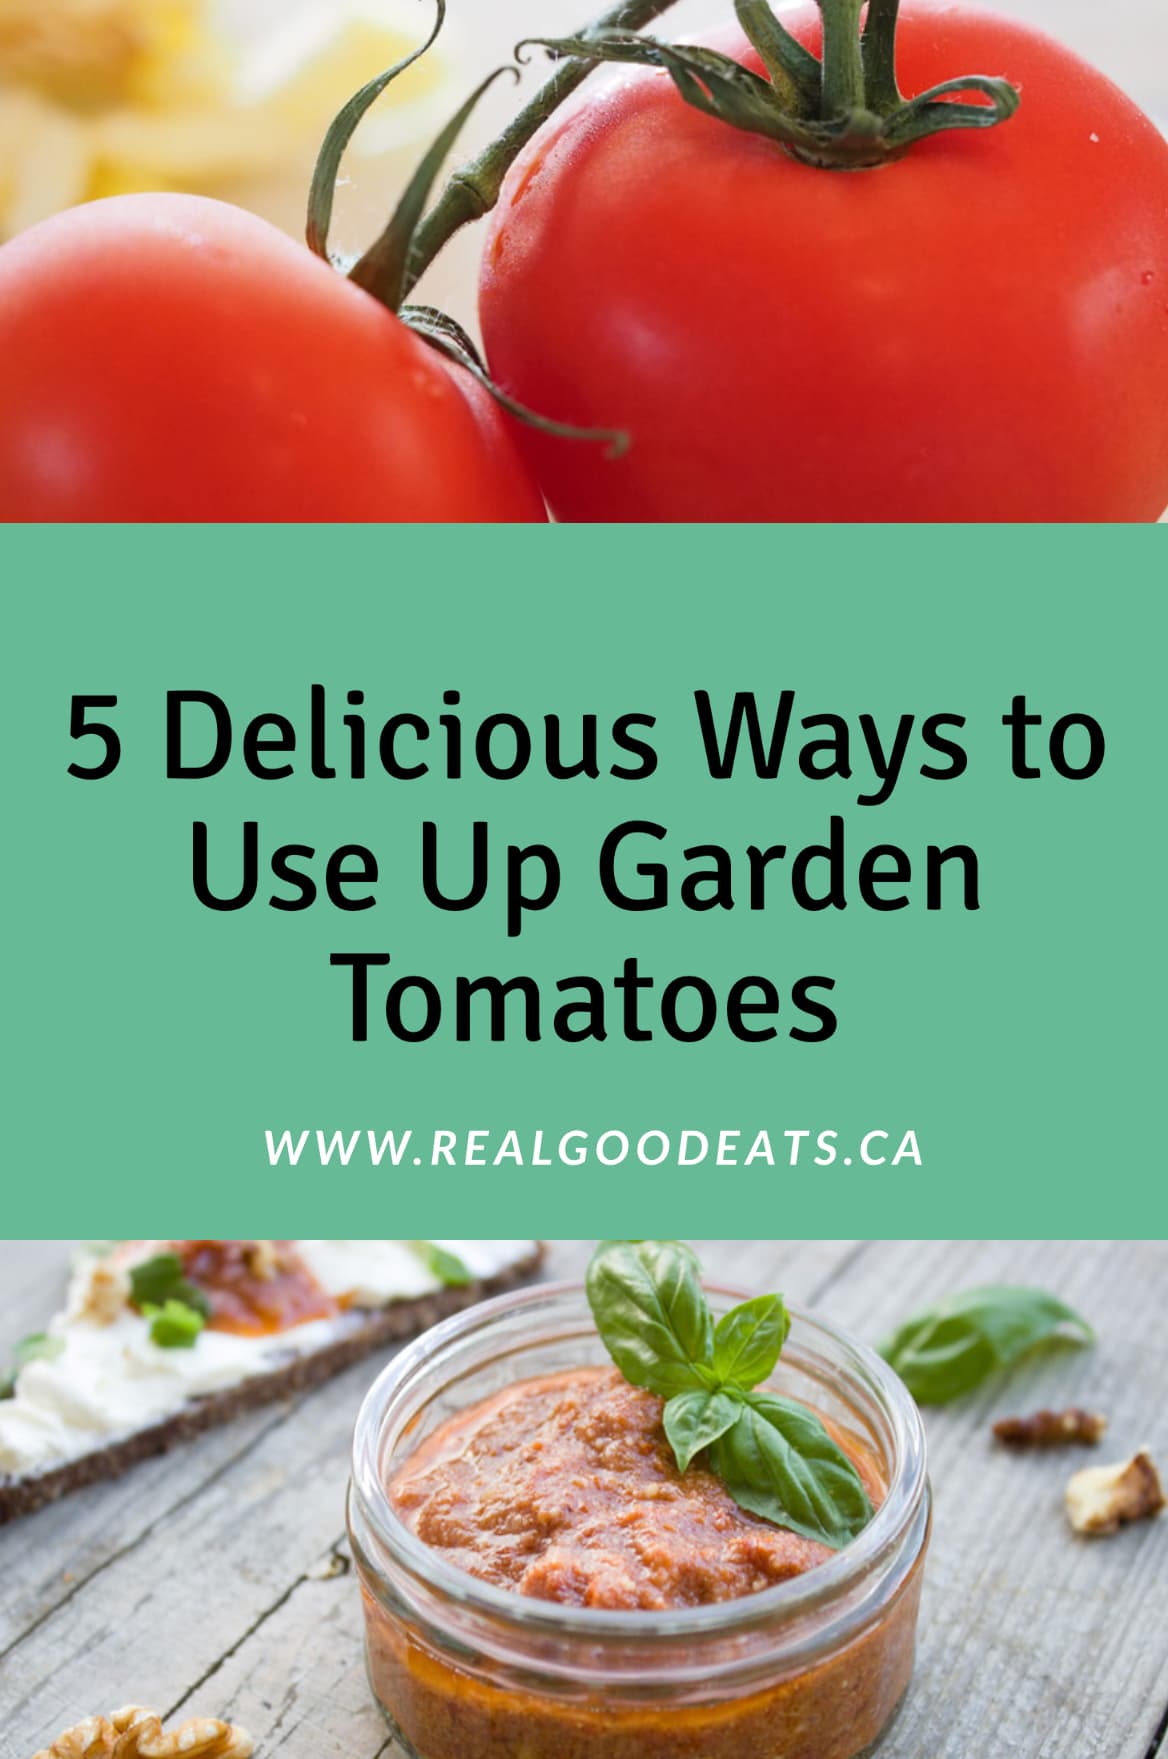 5 delicious ways to use up garden tomatoes blog graphic